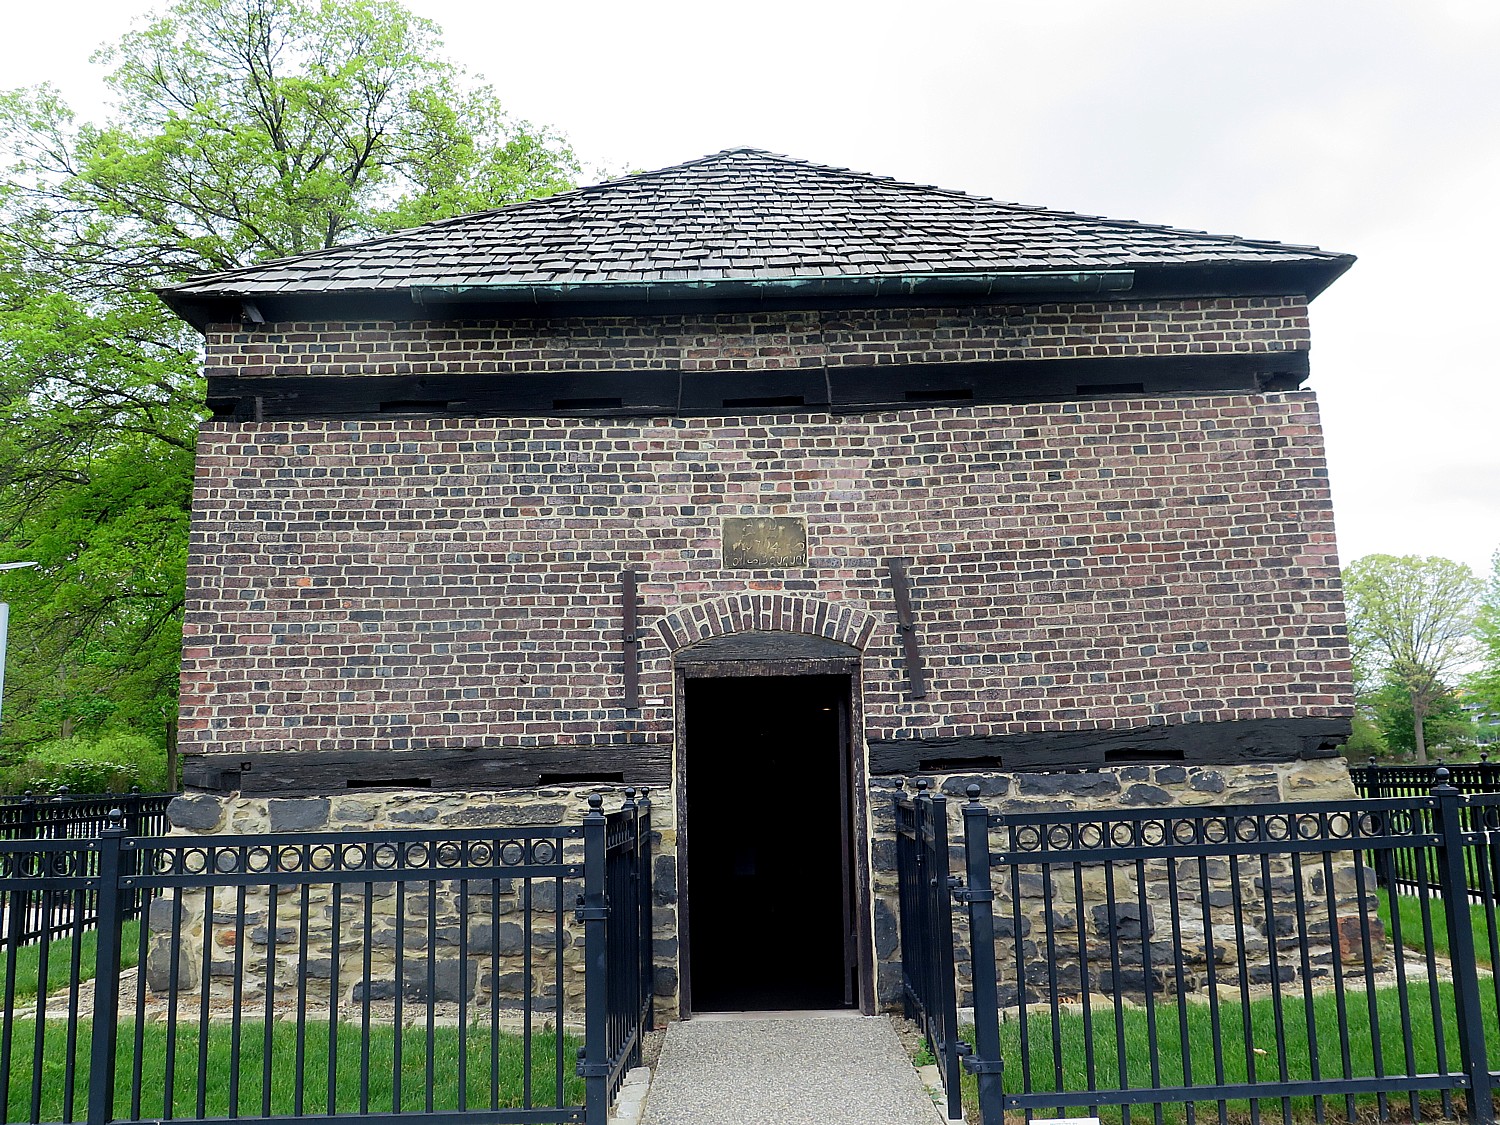 Fort Pitt Blockhouse, built in 1764, is the oldest building in Pittsburgh and the only remaining structure from colonial times © 2016 Karen Rubin/goingplacesfarandnear.com